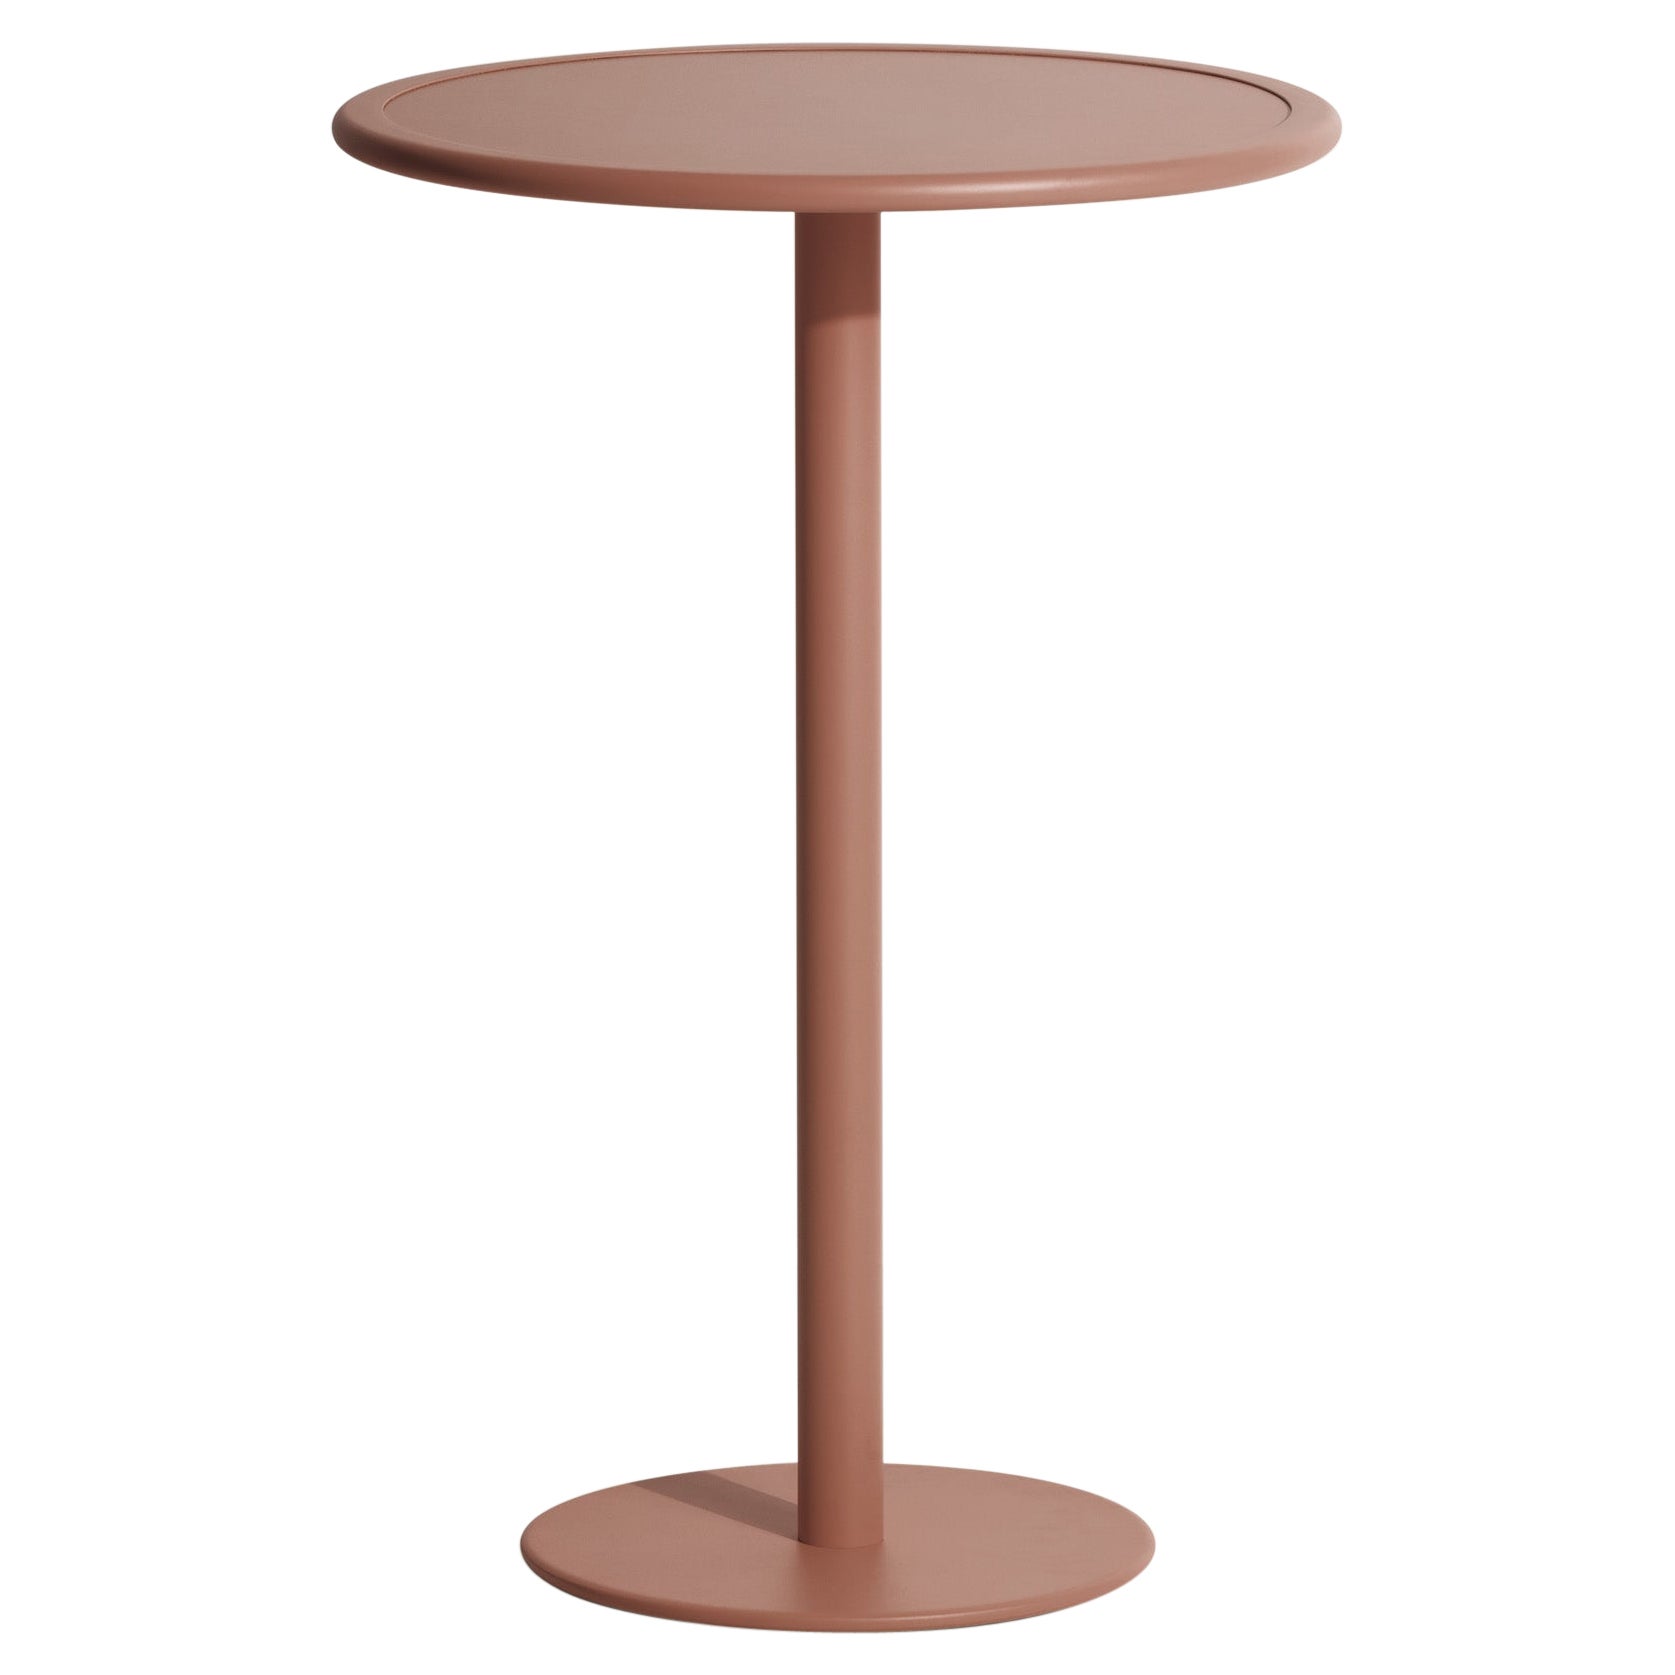 Petite Friture Week-End Round High Table in Terracotta Aluminium, 2017 For Sale